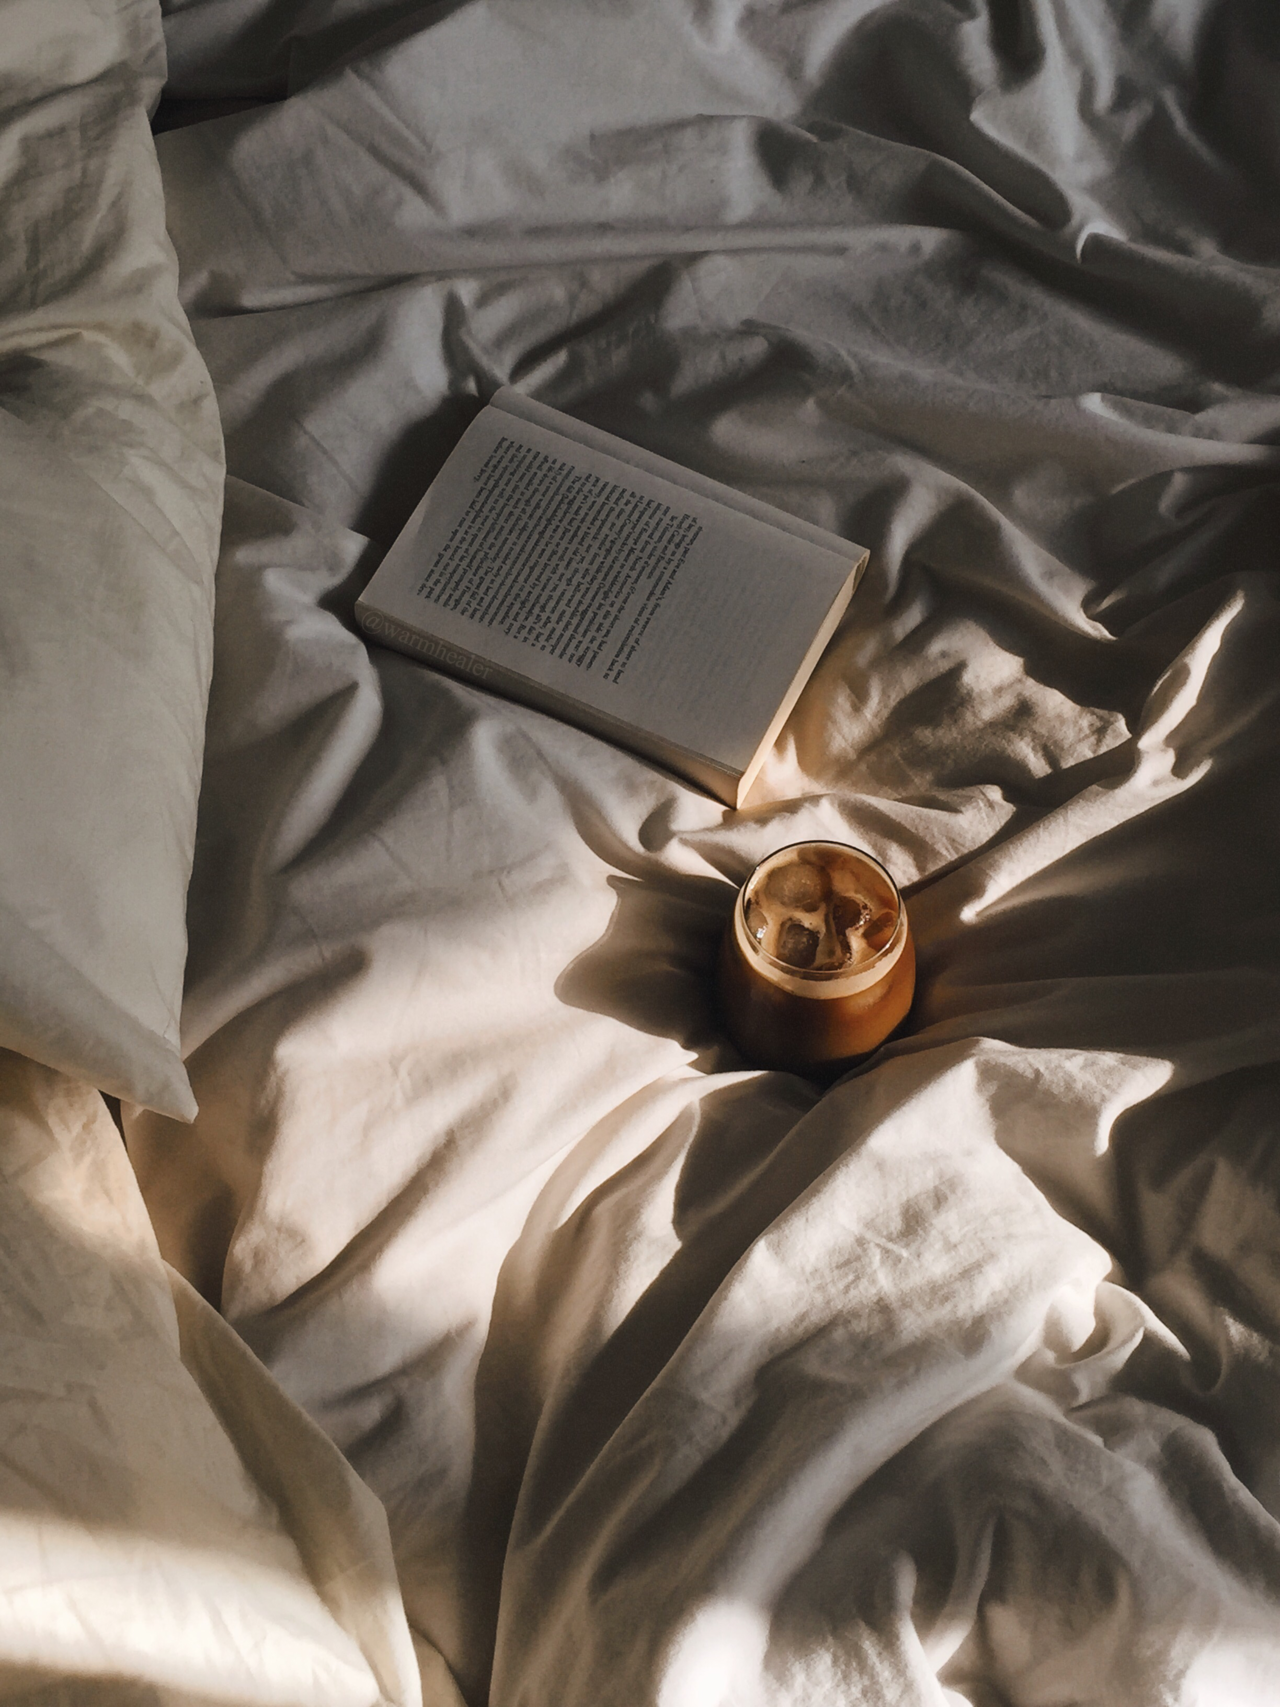 warmhealer:
â€œSorry posting has been sporadic â€“ I am struggling with things at the moment. Autumn mornings have been one of many small refuges, watching the sunrise from bed with coffee and Finnegans Wake.
â€